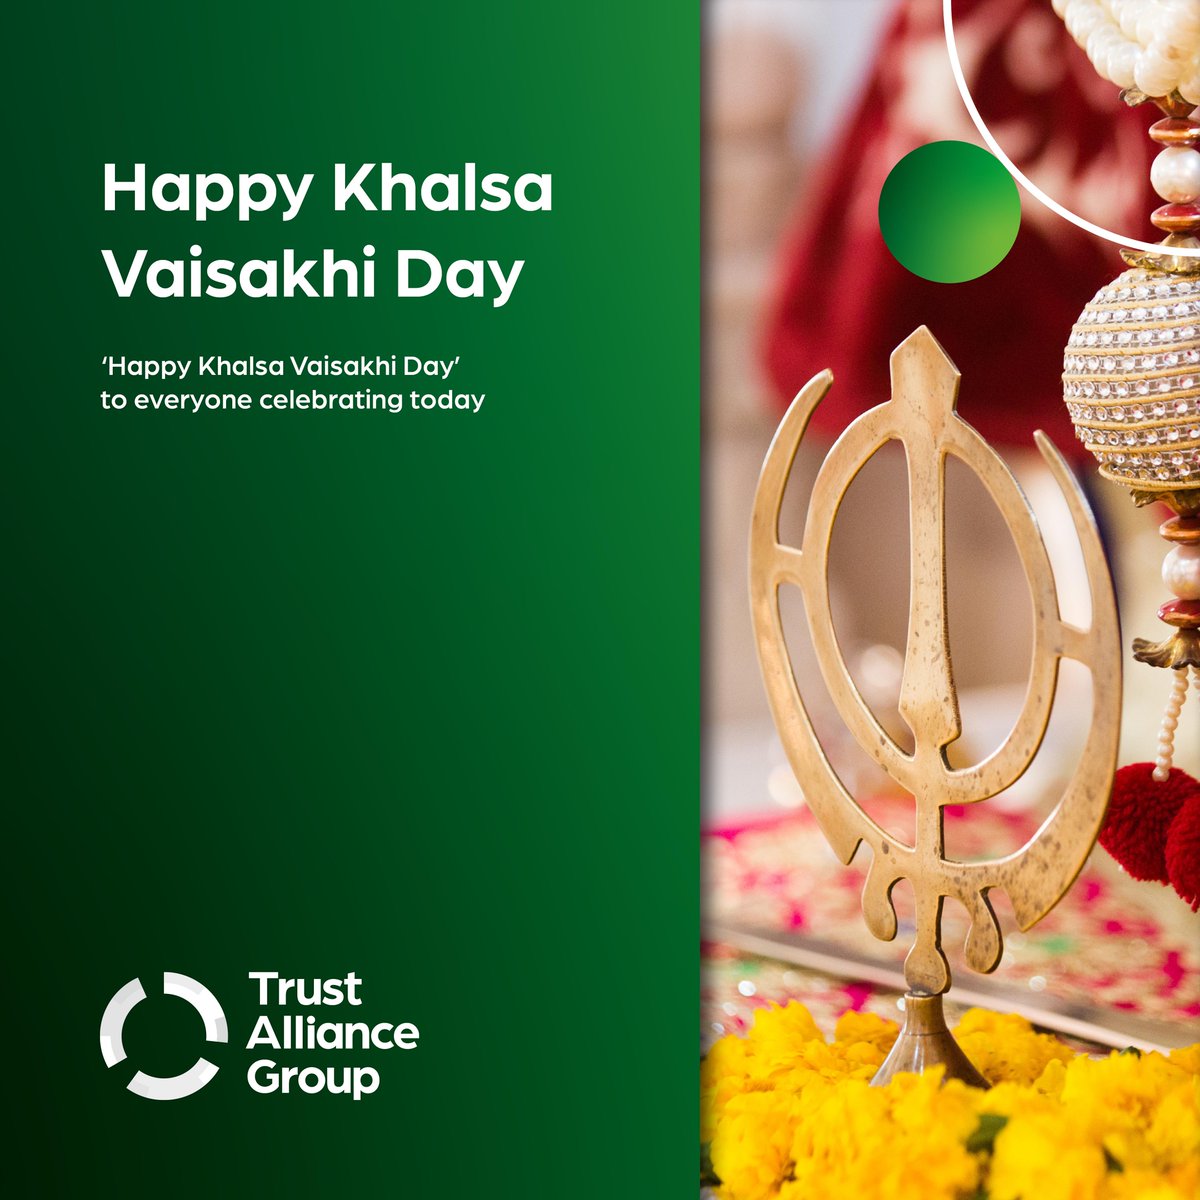 We would like to wish Happy Khalsa Vaisakhi Day to everyone celebrating today.